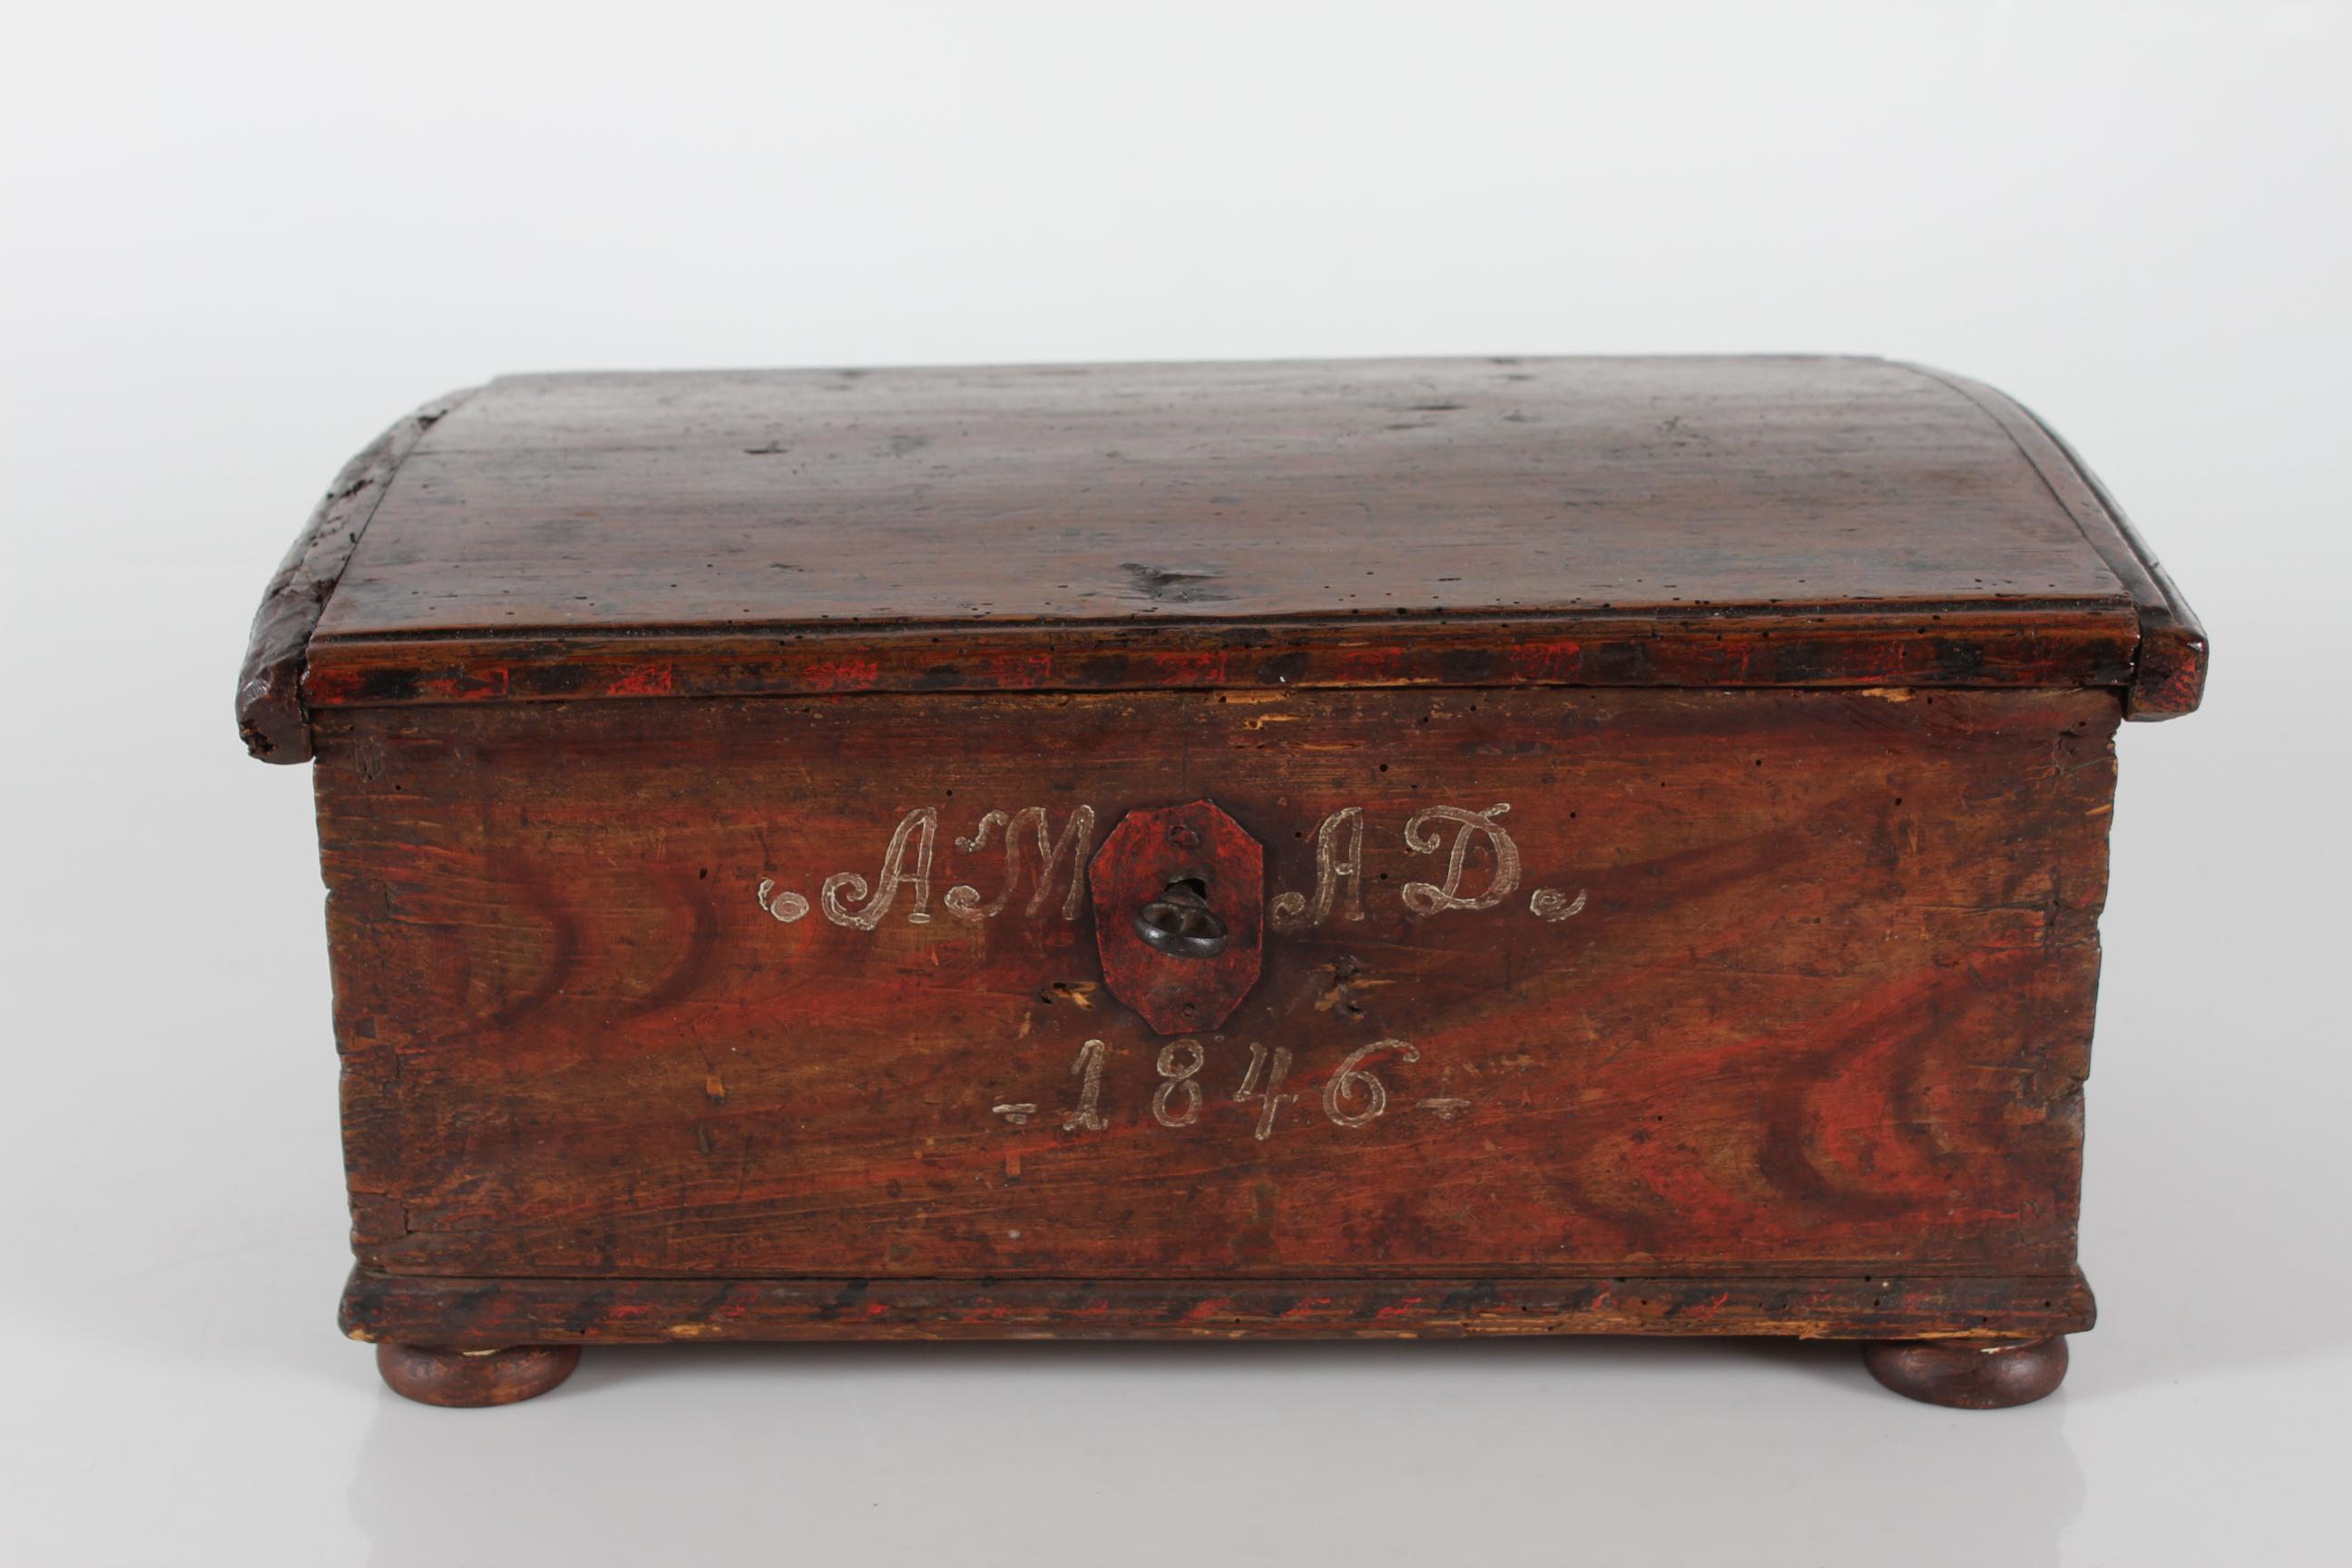 Original Scandinavian antique chest box from 1846, most likely from Sweden where we found it.

The chest box is made from pine wood and is handpainted. The paint is in warm brown shades and also illudes wood. It has worn off here and there and faded